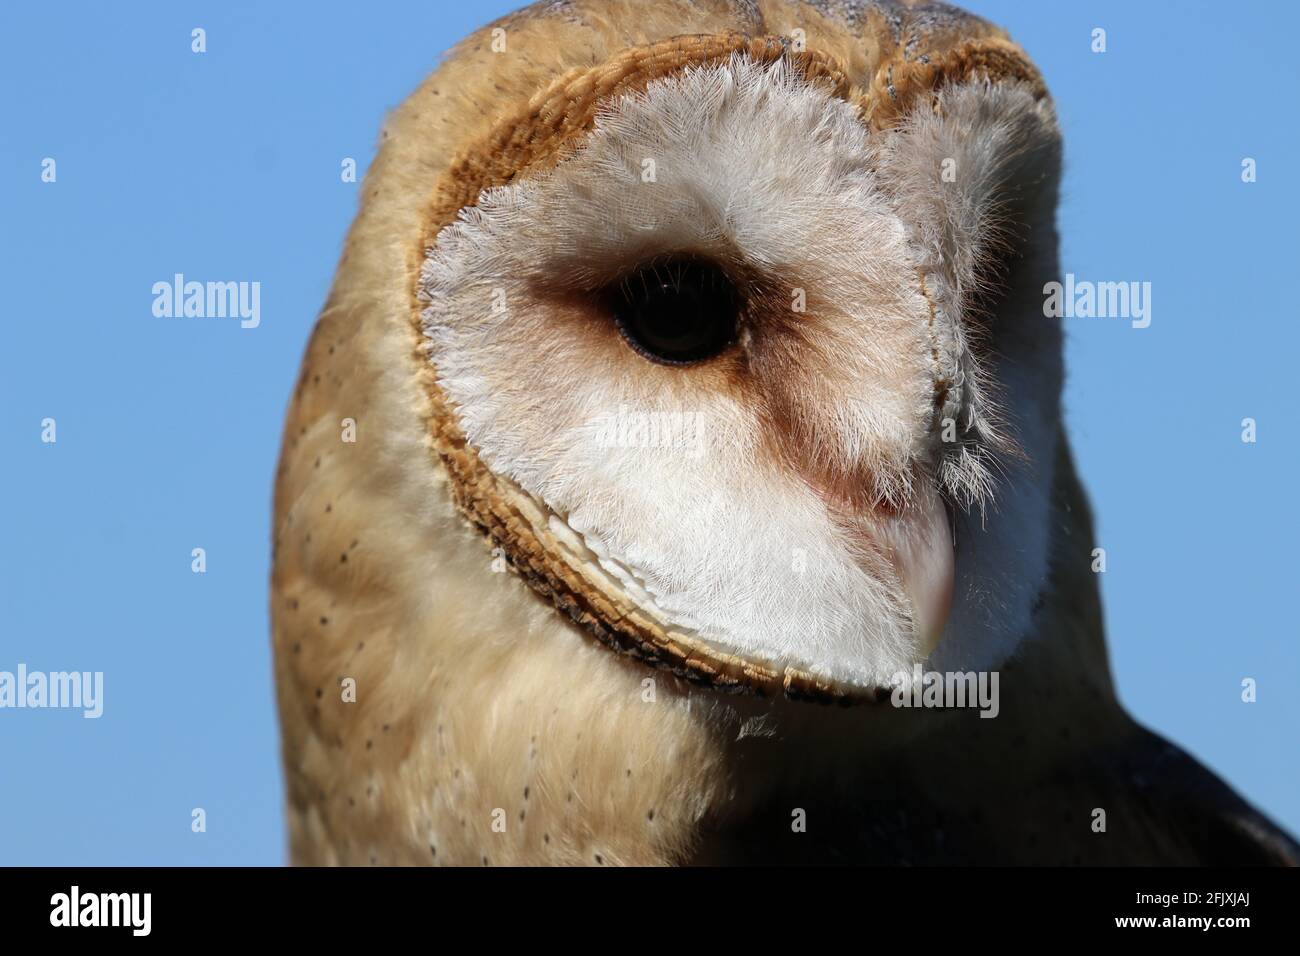 Barn owl bird of prey face close-up against blue background Stock Photo